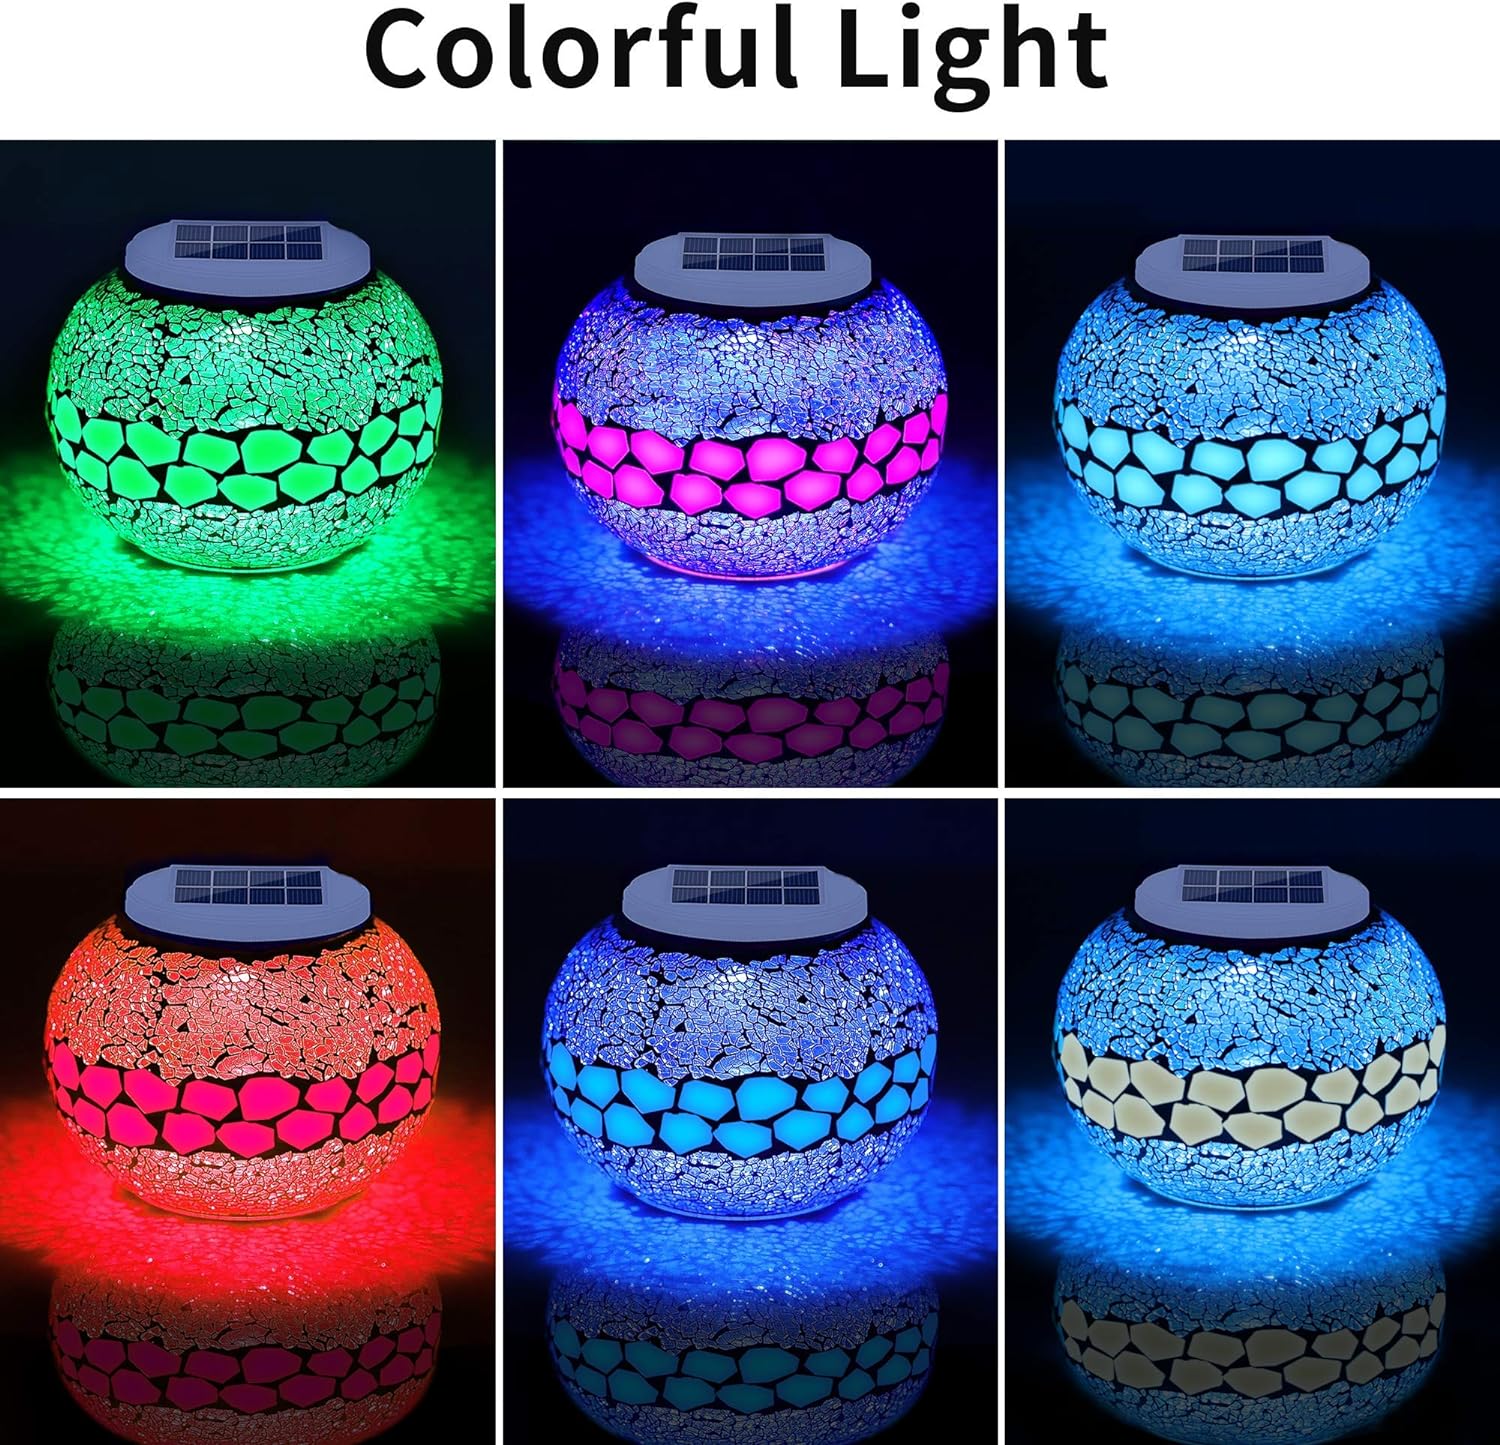 Pandawill Mosaic Solar Glass Garden Decoration Light, Rechargeable Color-Changing Solar Table Lamp, Waterproof LED Night Light for Garden